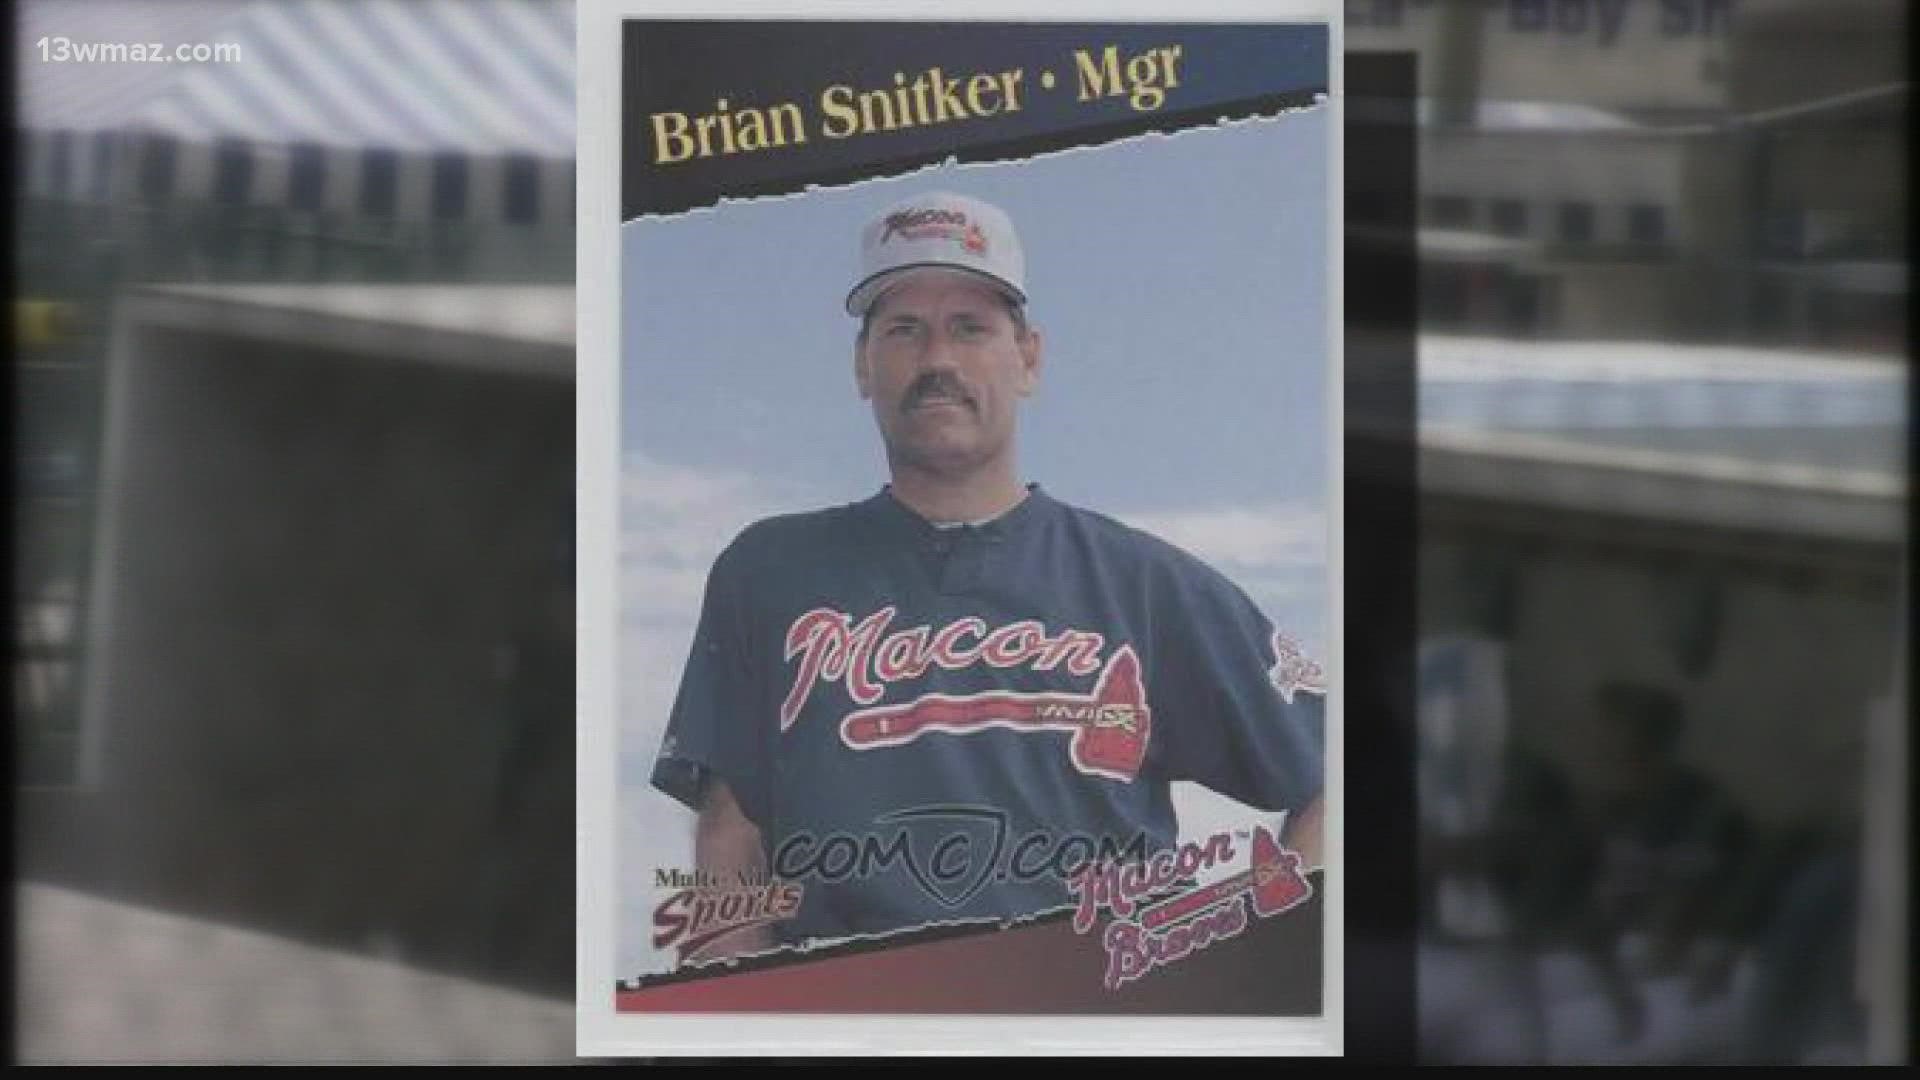 The Atlanta Braves aren't the only Braves Brian Snitker has coached -- he has a significant tie to Macon